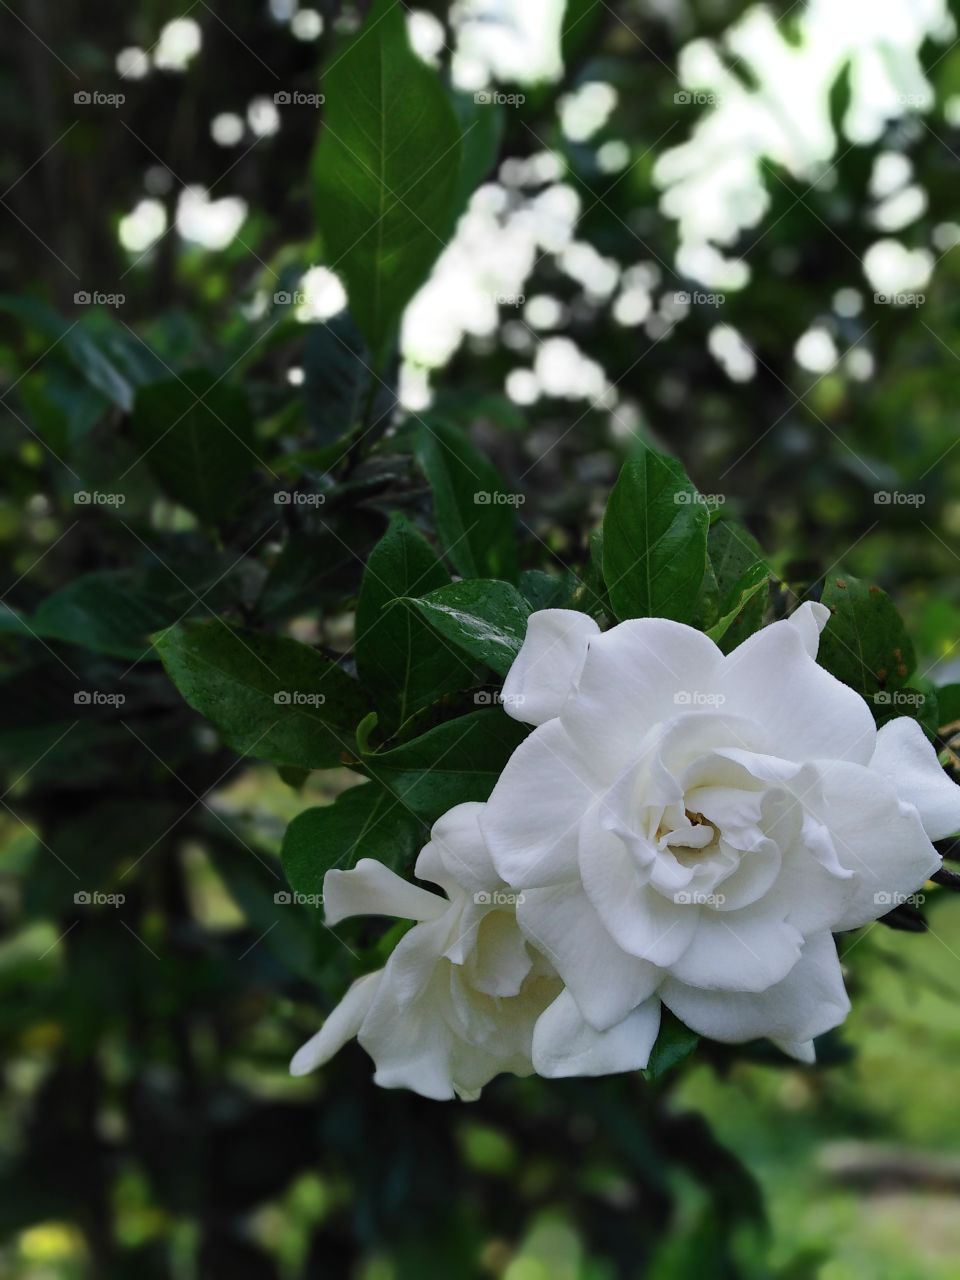 A rare white flower with a bokeh green background